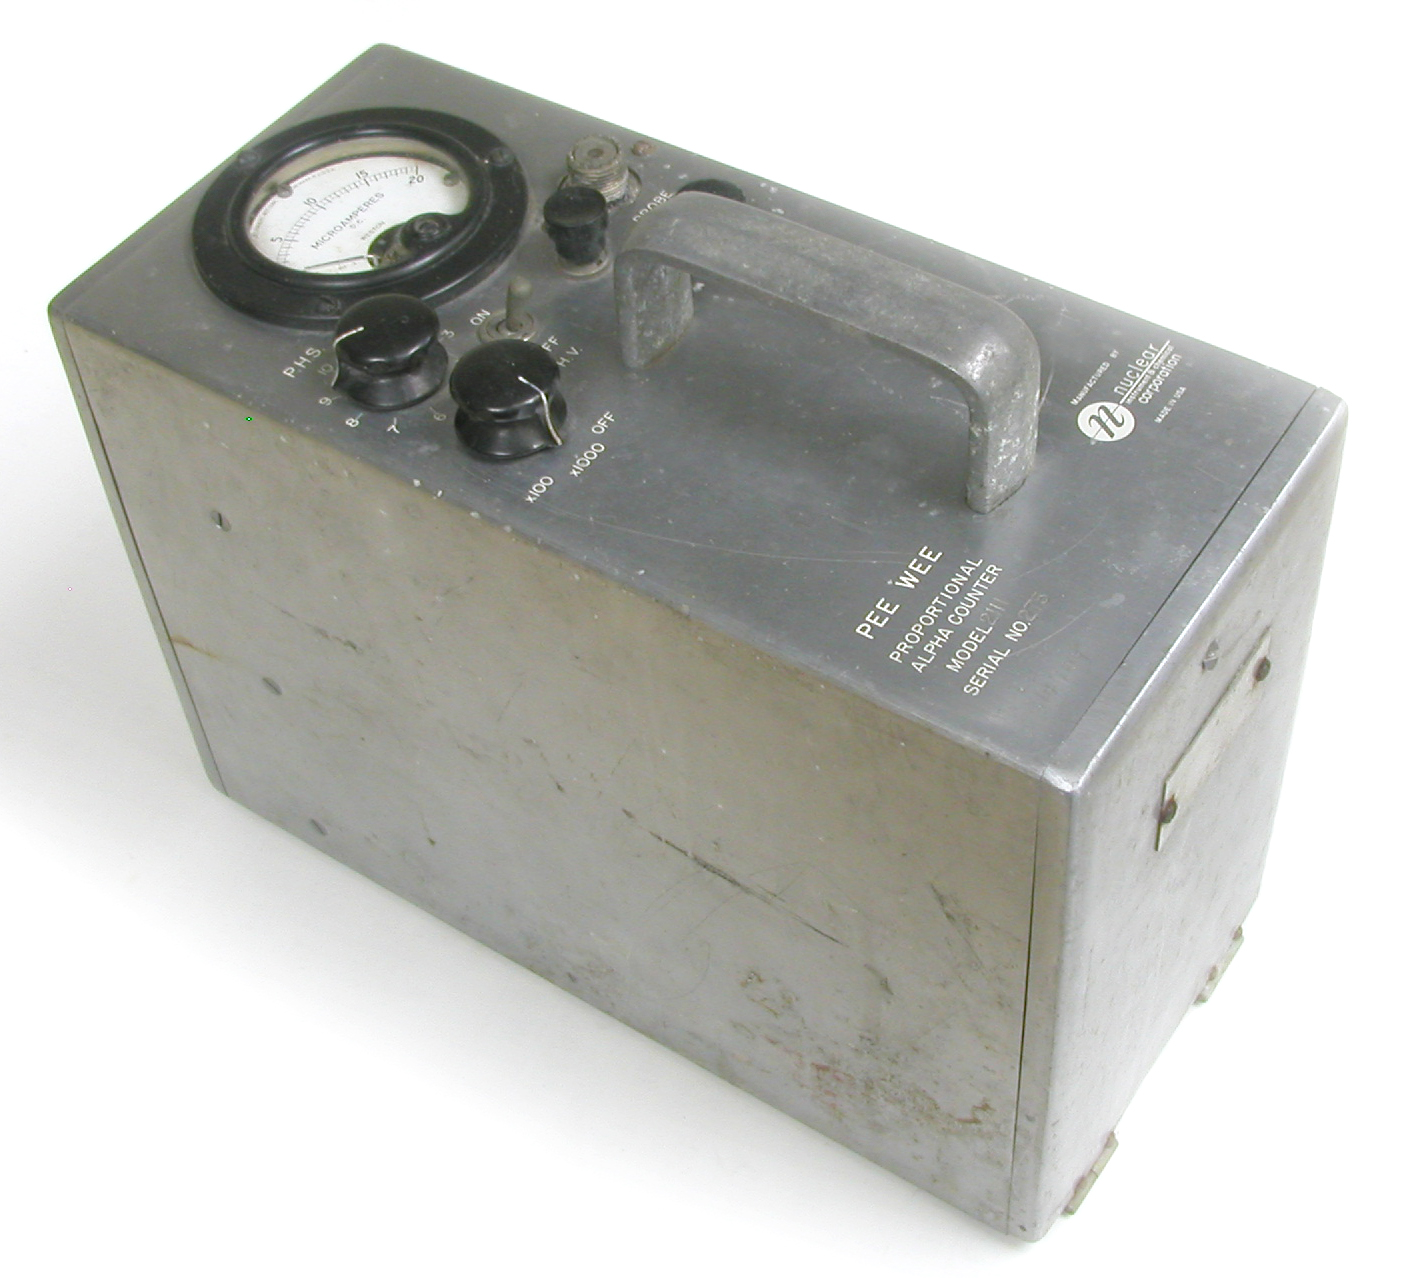 "Pee Wee" Model 2111 Alpha Counter